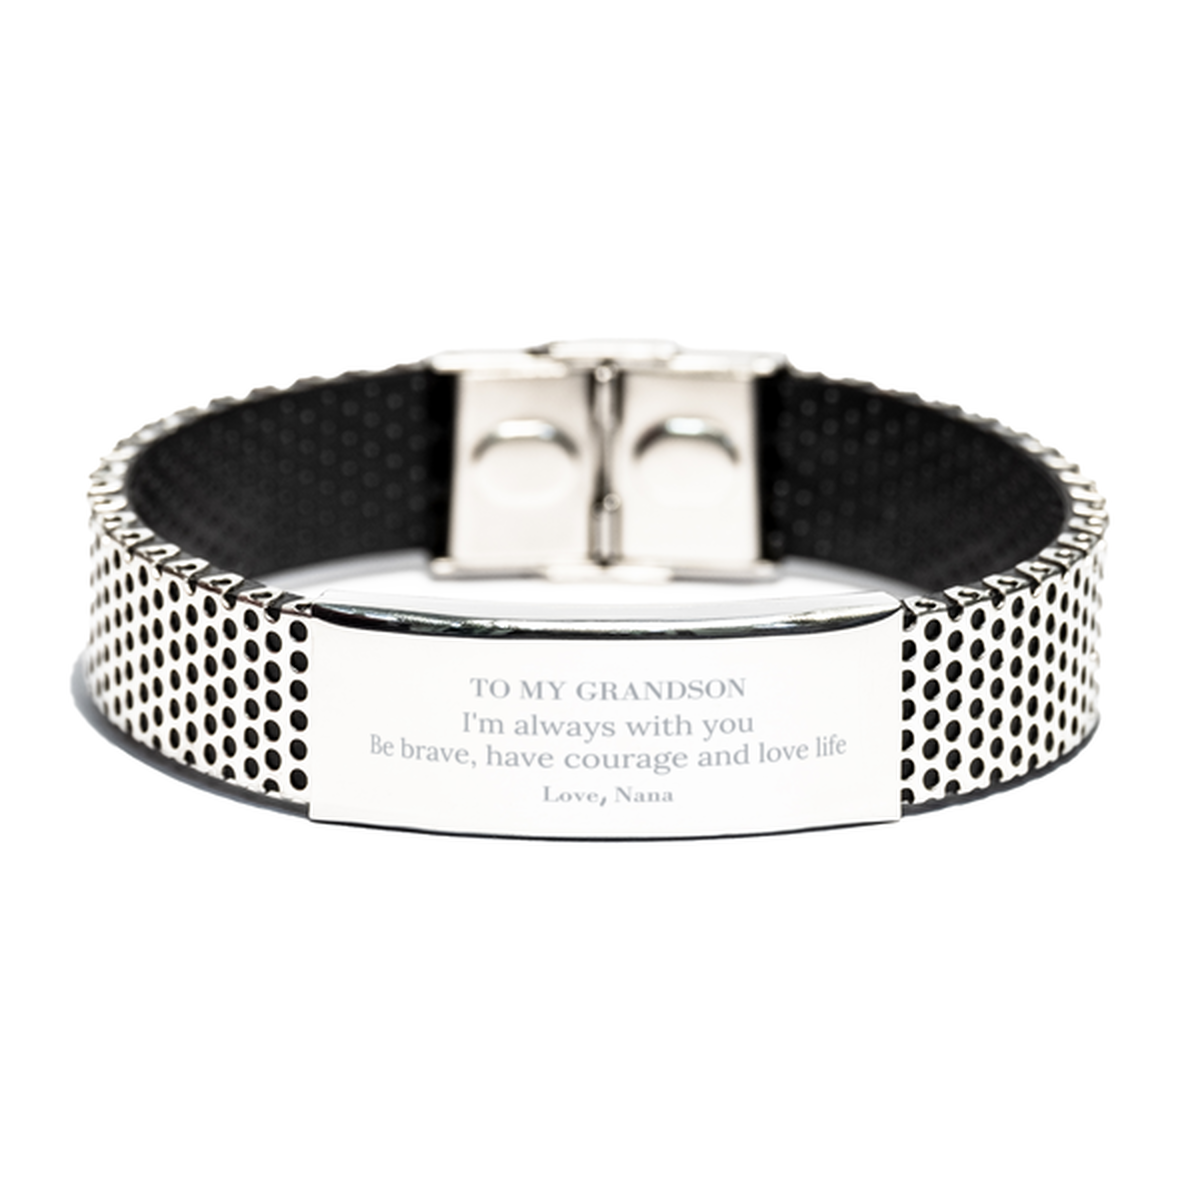 To My Grandson Gifts from Nana, Unique Stainless Steel Bracelet Inspirational Christmas Birthday Graduation Gifts for Grandson I'm always with you. Be brave, have courage and love life. Love, Nana